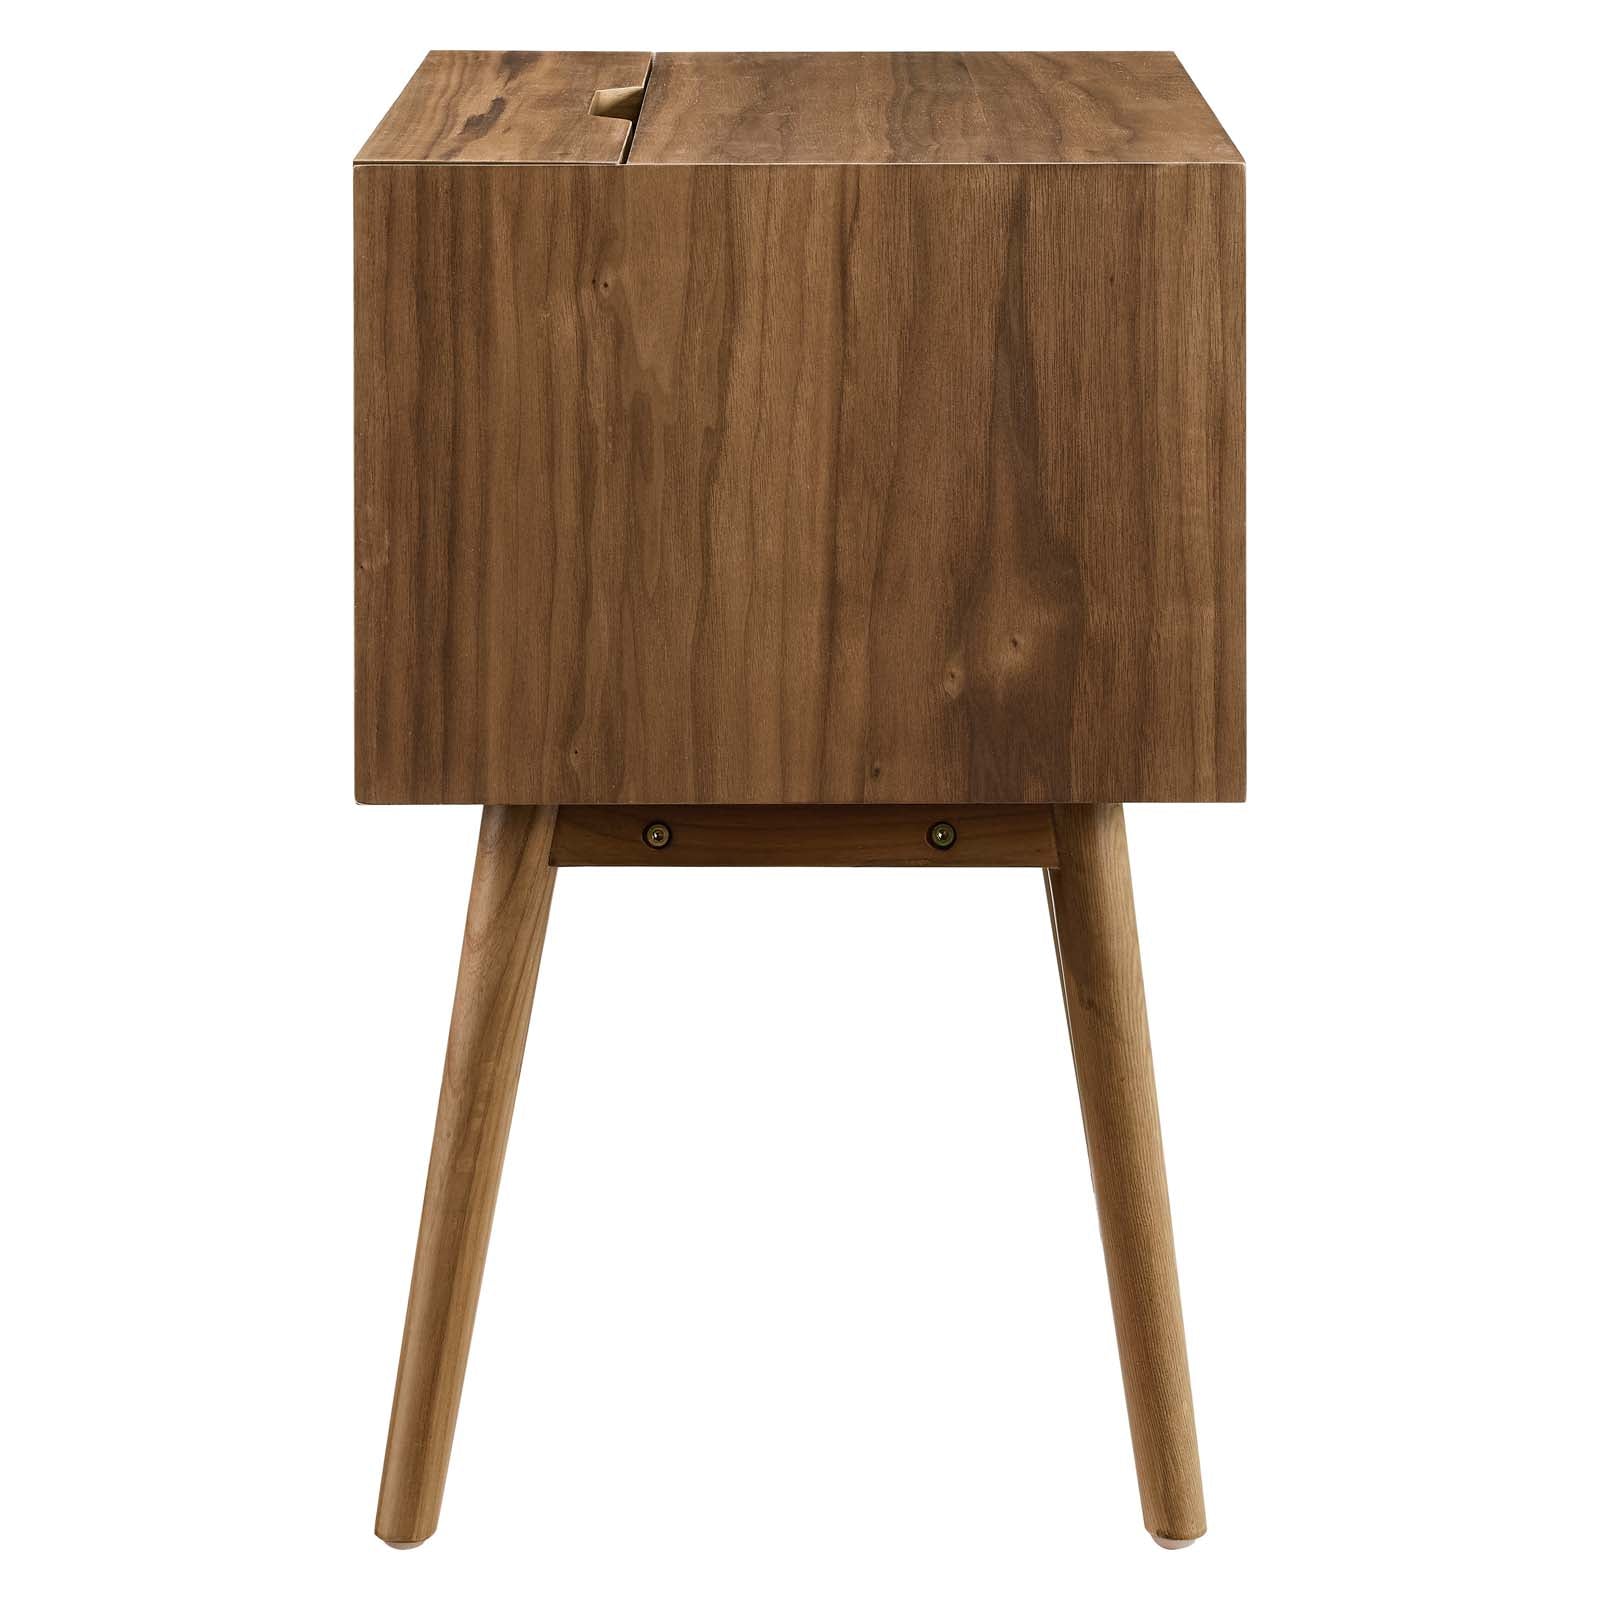 Ember Wood Nightstand With USB Ports